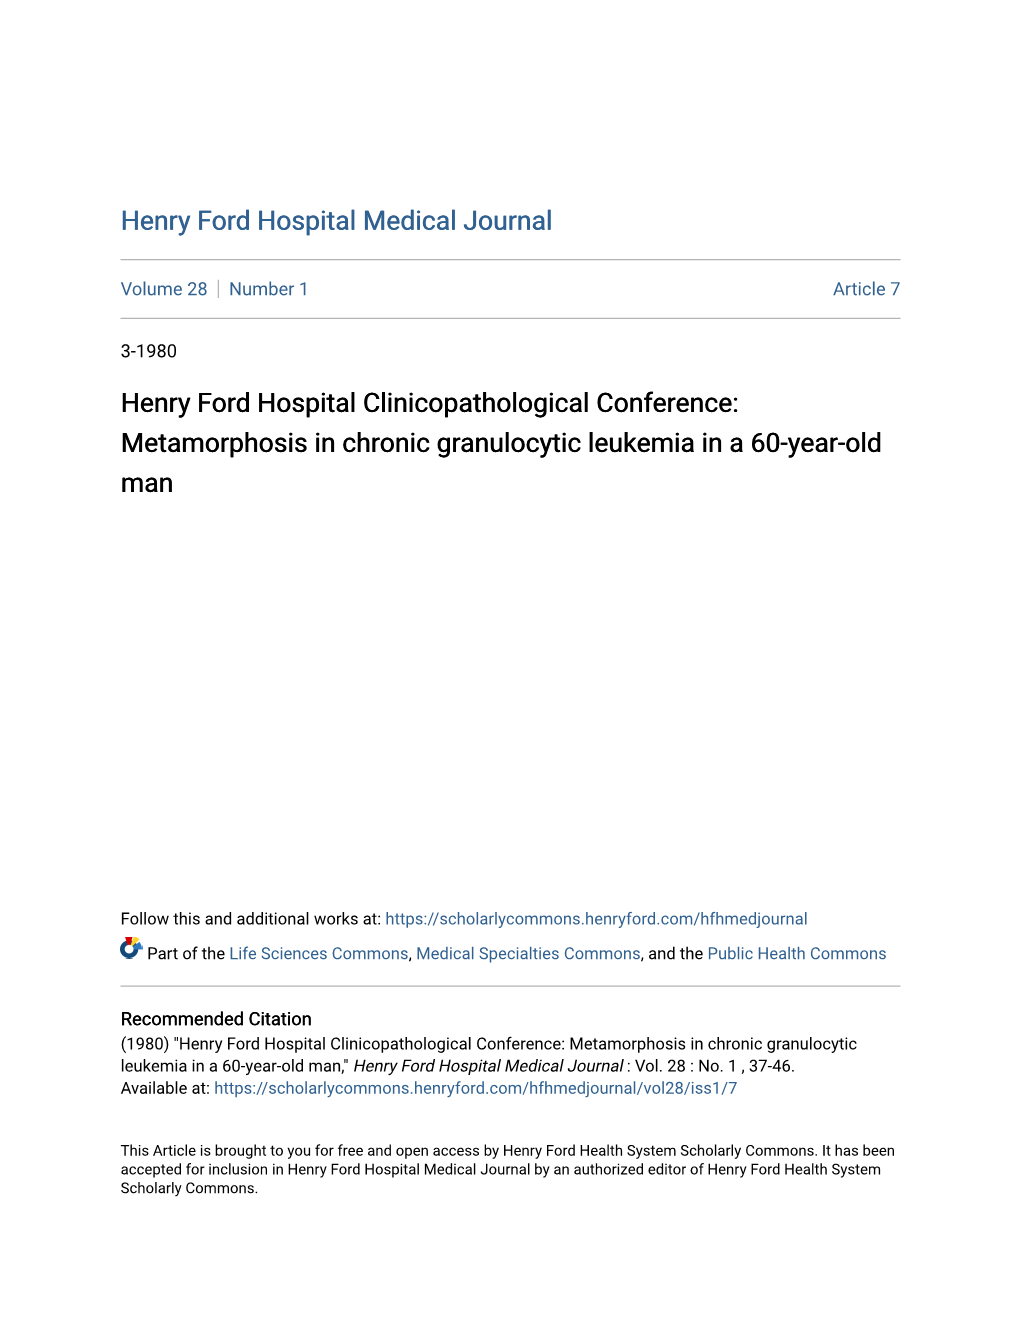 Henry Ford Hospital Clinicopathological Conference: Metamorphosis in Chronic Granulocytic Leukemia in a 60-Year-Old Man